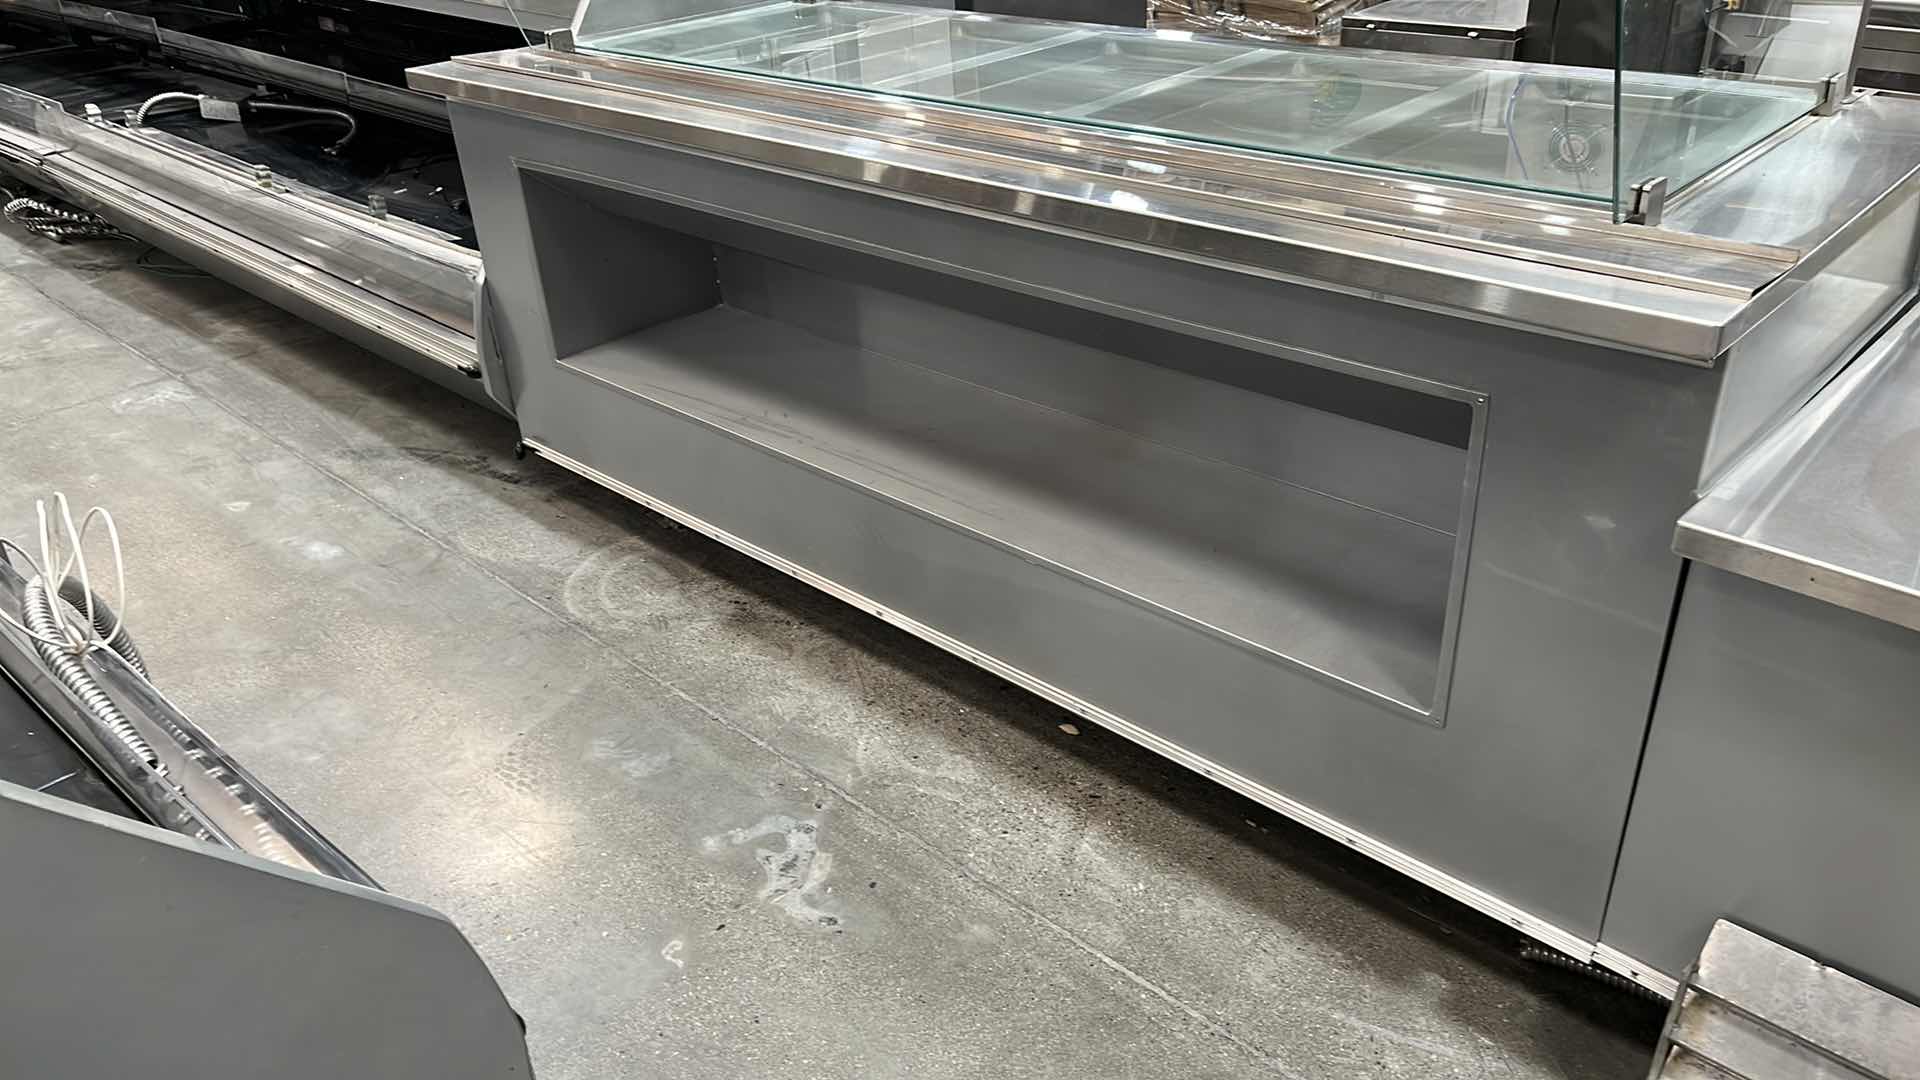 Photo 4 of HUSSMANN COMMERCIAL SELF-SERVICE FOOD COUNTER W HOT WELLS (MODEL IM-05-I7-FH)